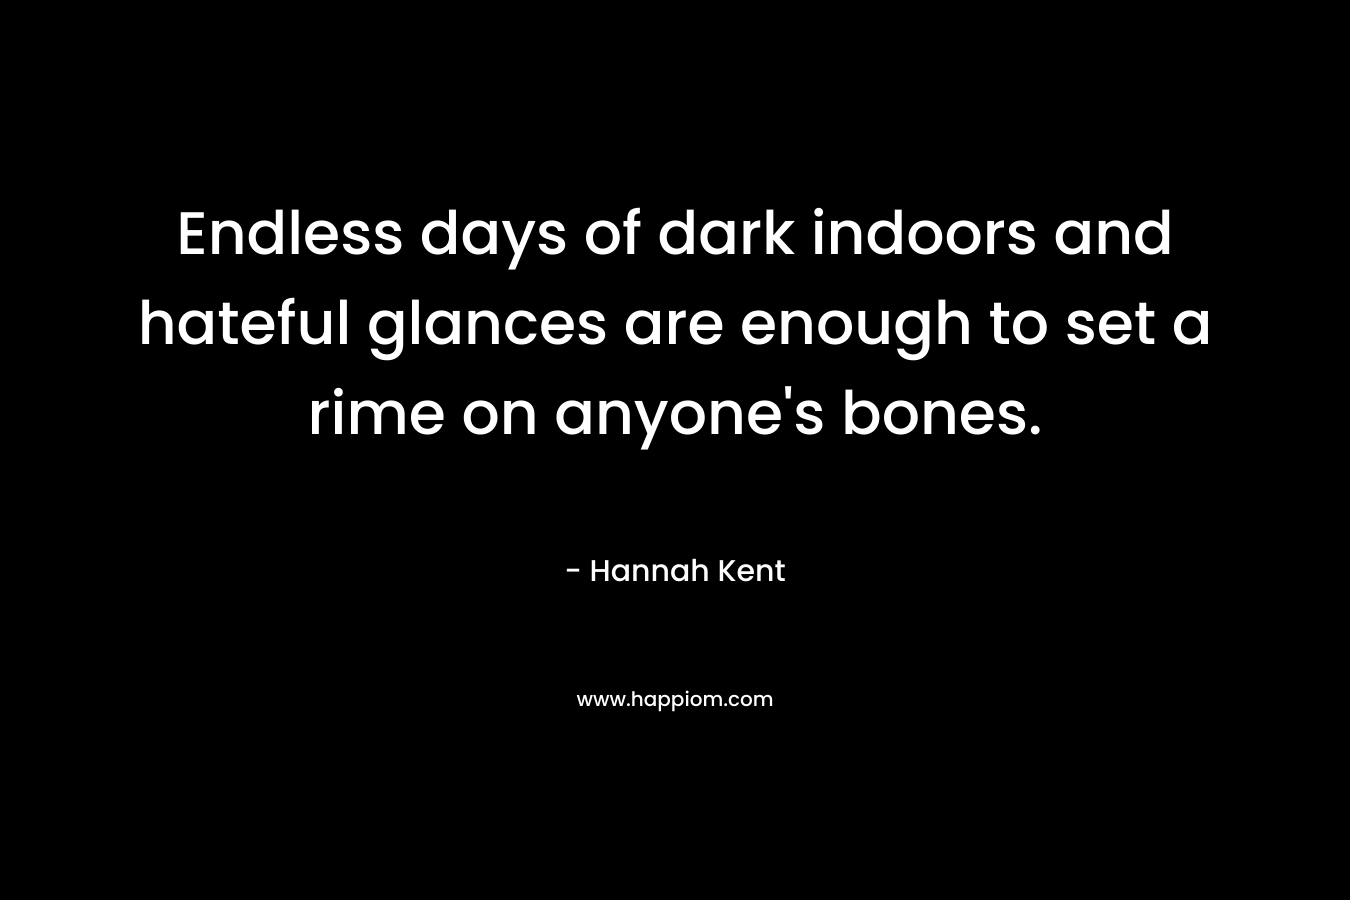 Endless days of dark indoors and hateful glances are enough to set a rime on anyone’s bones. – Hannah Kent